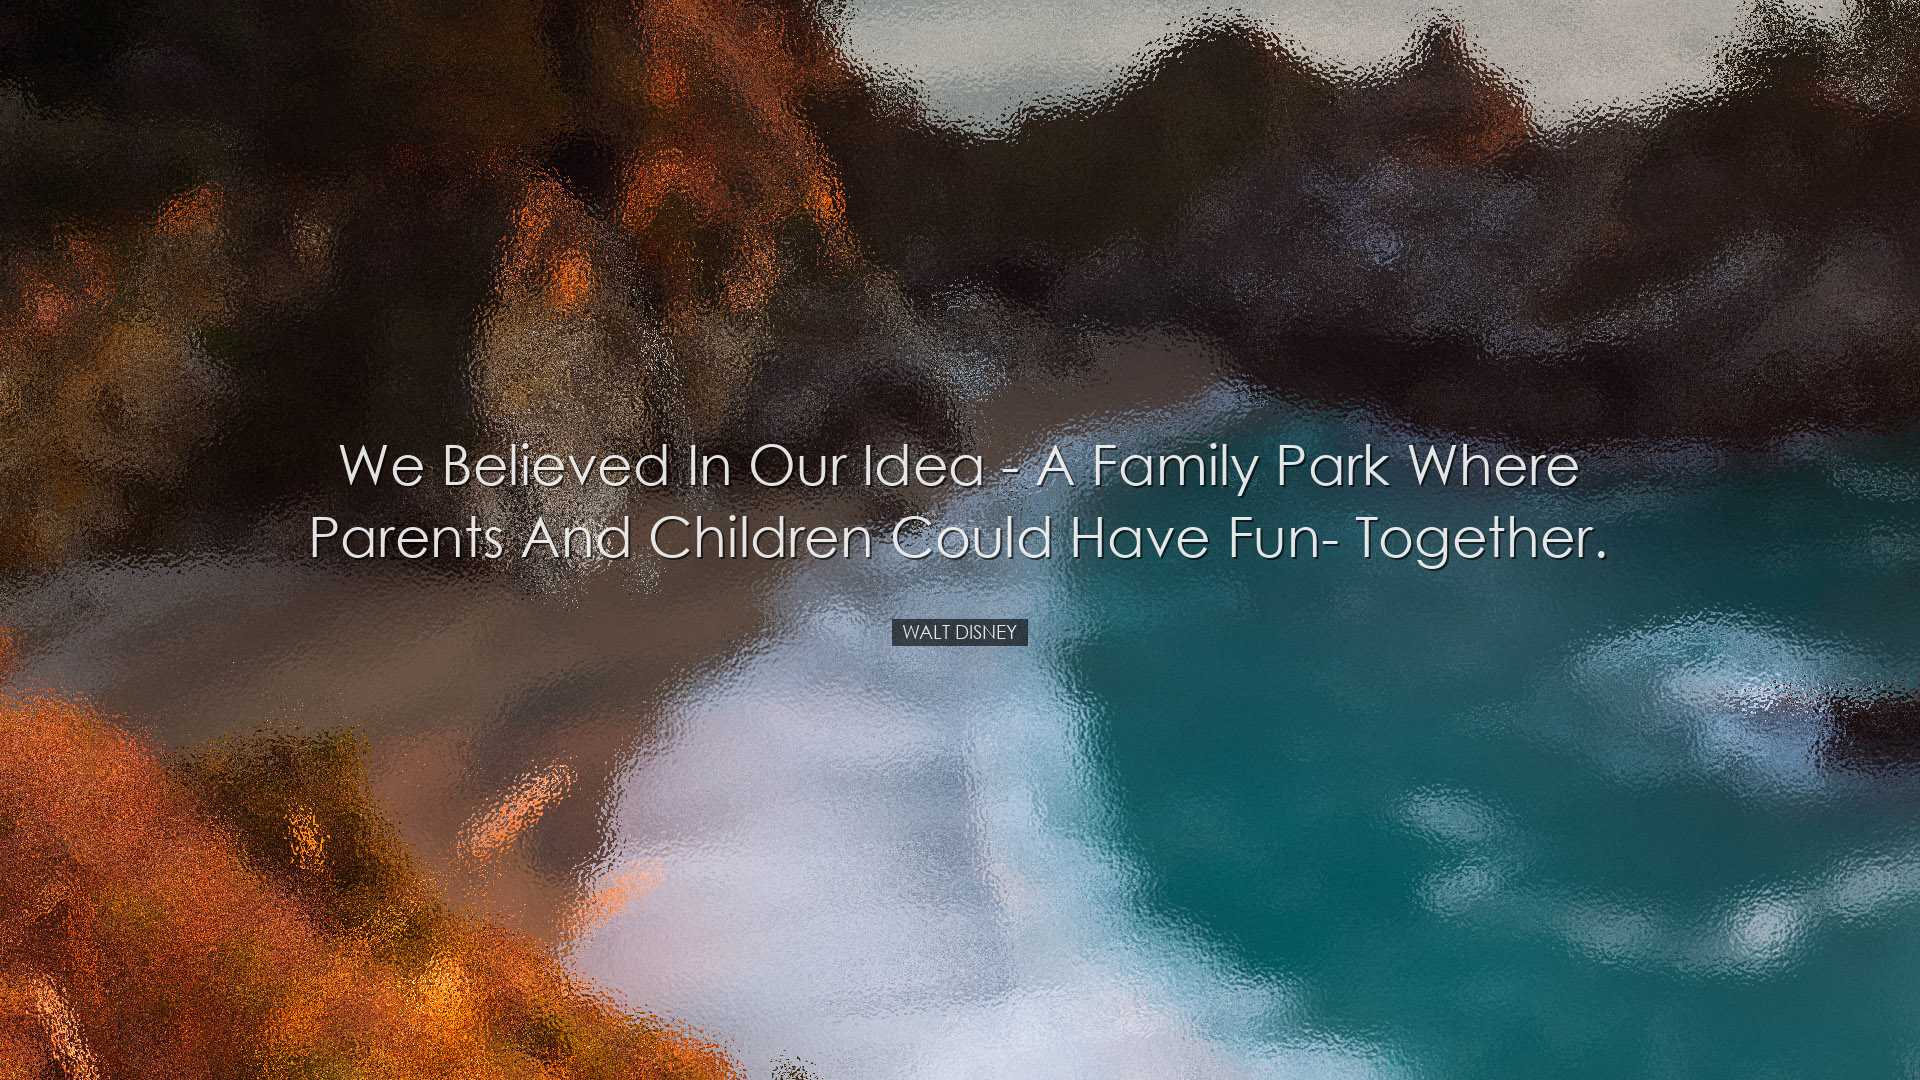 We believed in our idea - a family park where parents and children